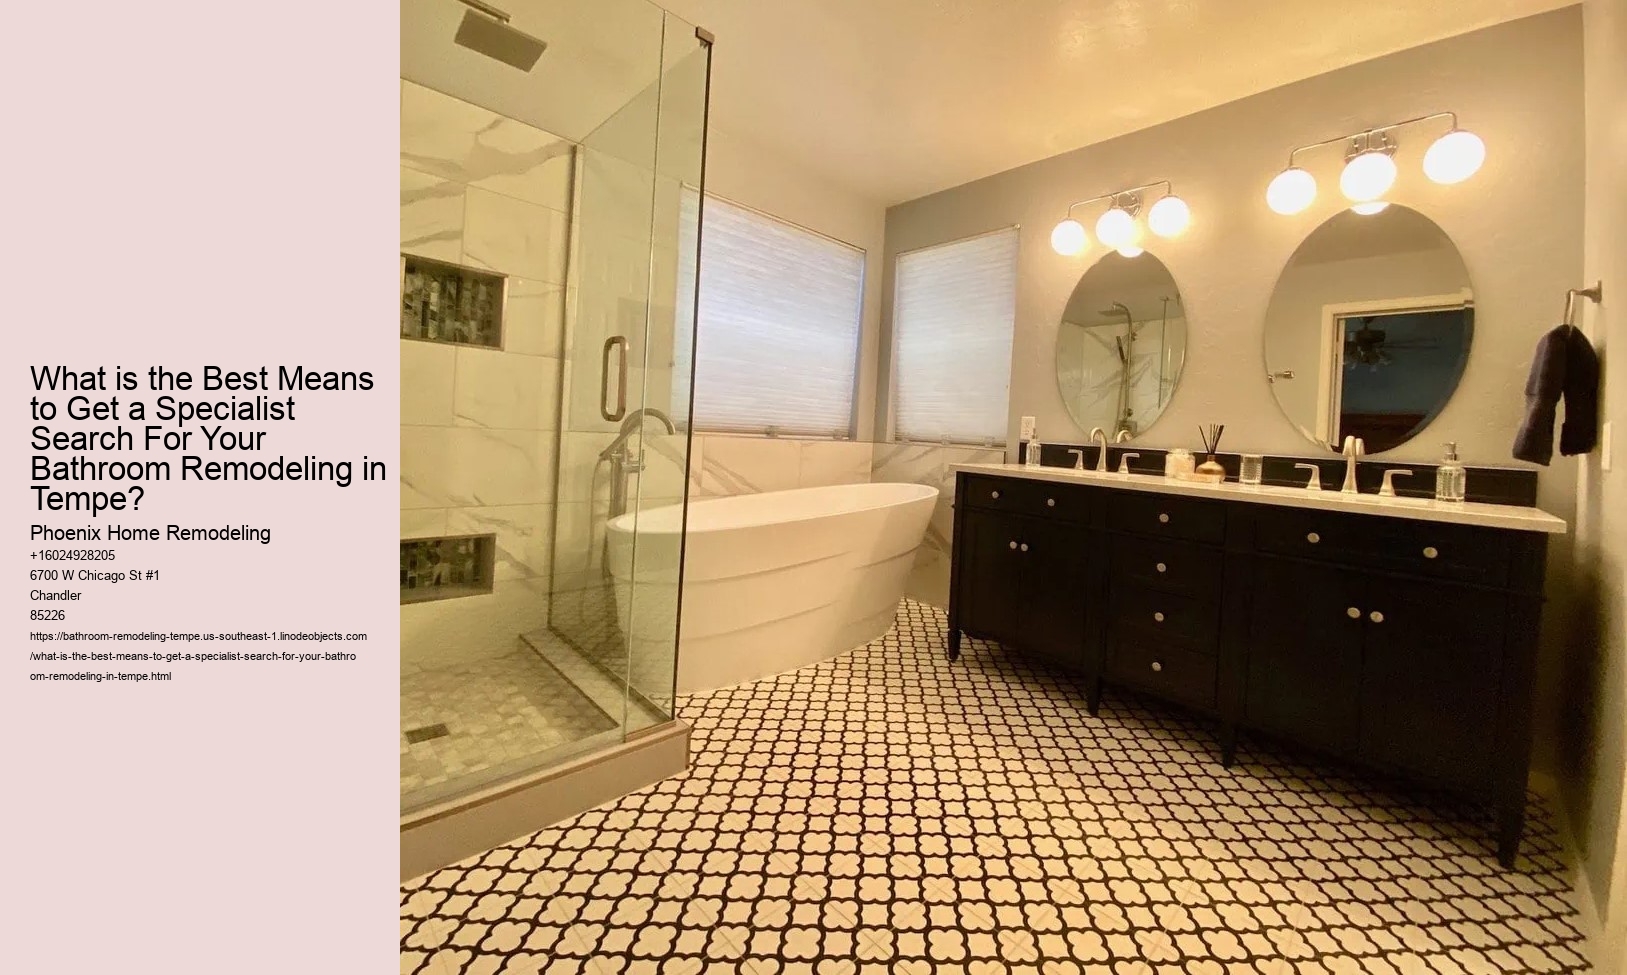 What is the Best Means to Get a Specialist Search For Your Bathroom Remodeling in Tempe?